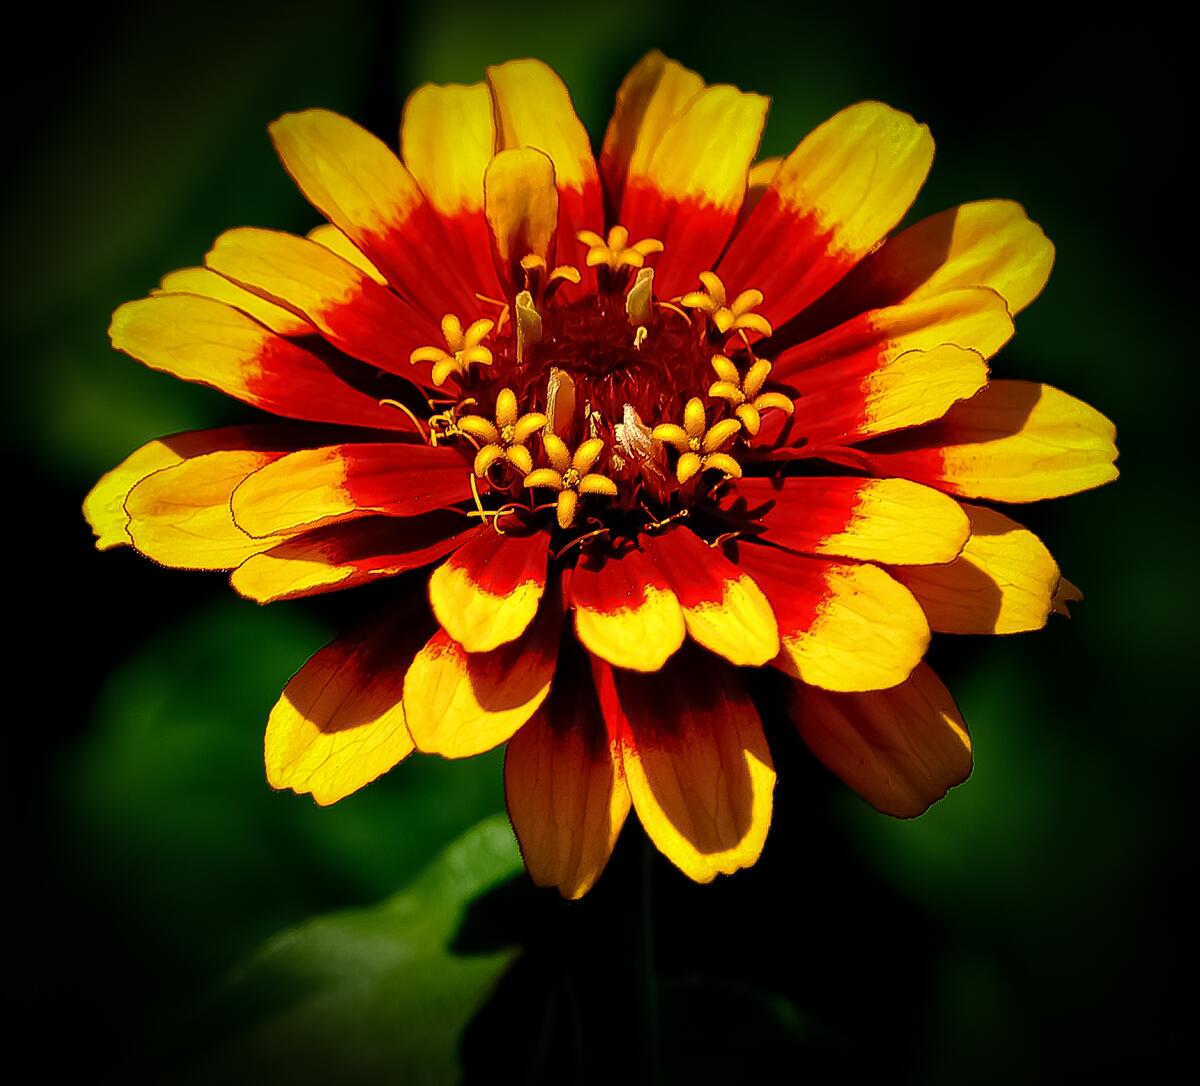 Beautiful yellow flower with red closer to the center